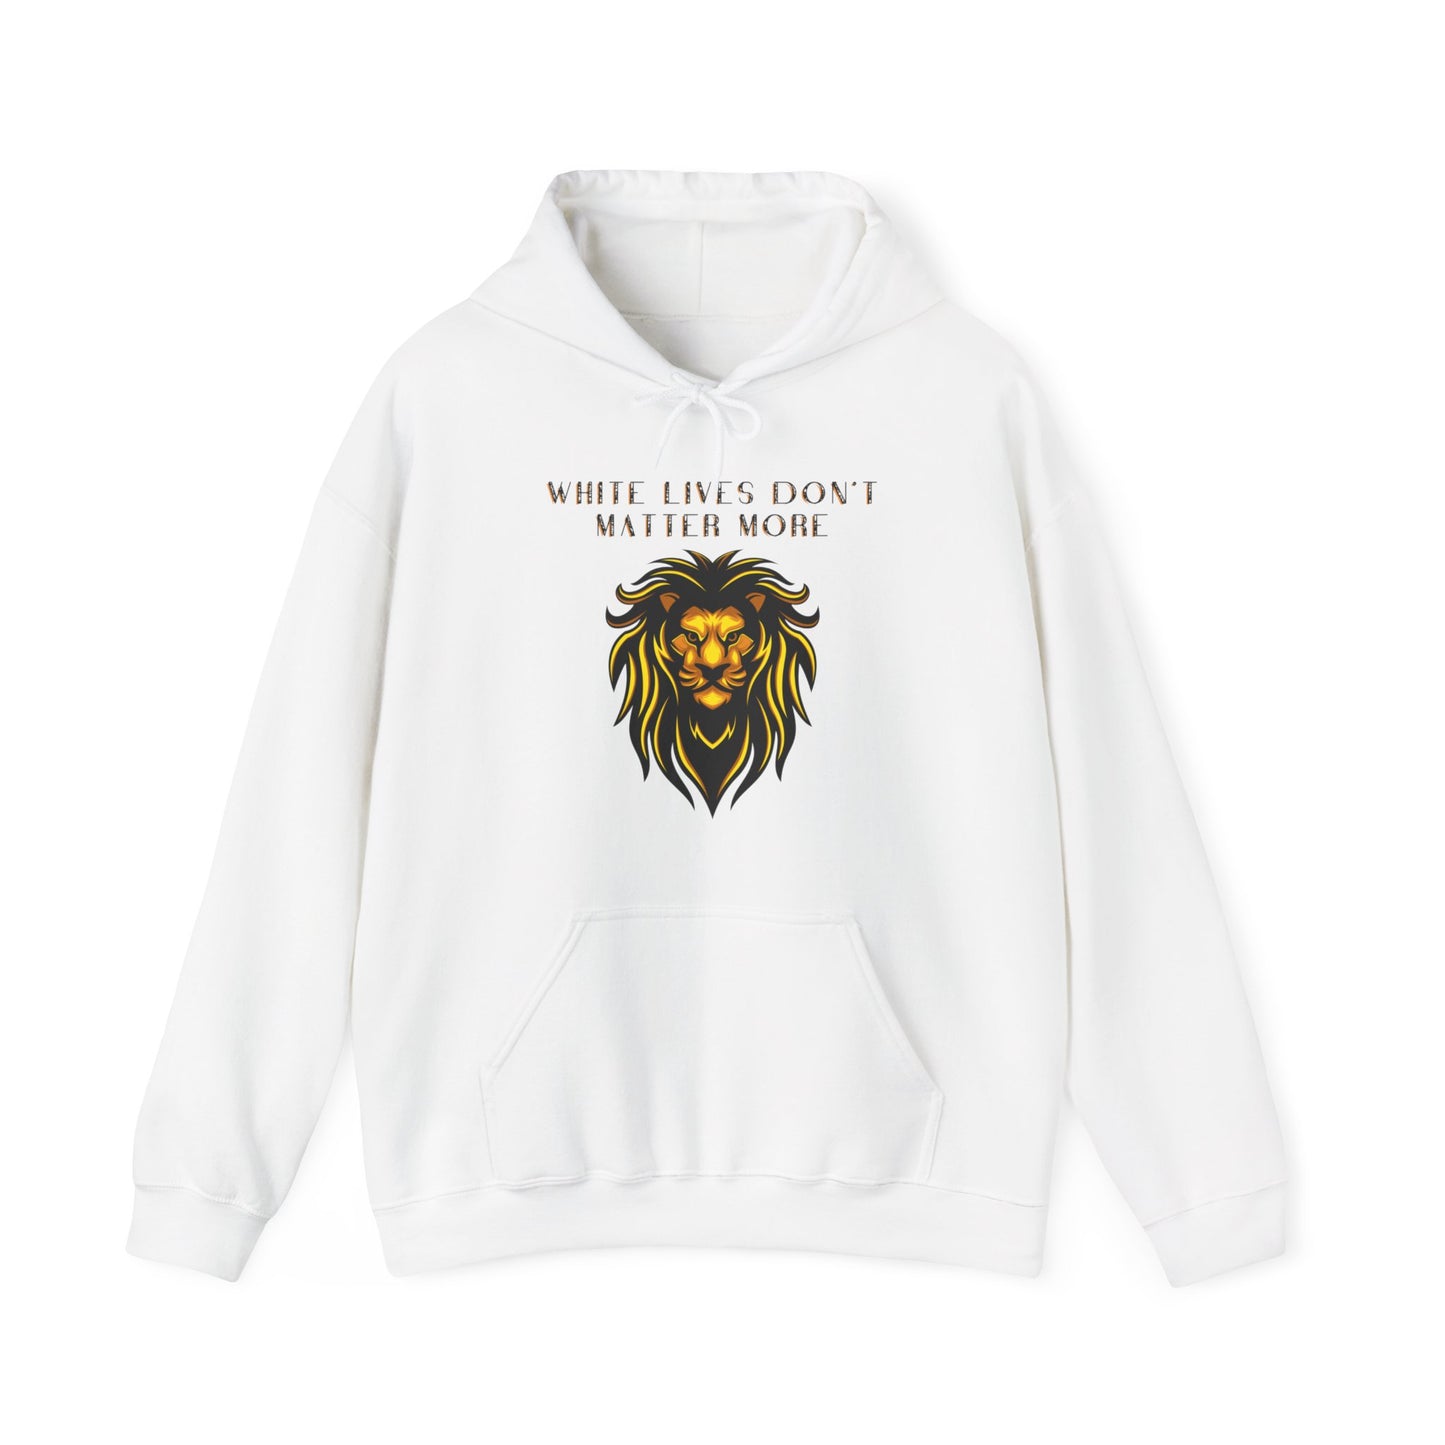 "White Lives Don't Matter More" Hooded Heavyweight Sweatshirt with Bold Black Text and Lion Graphic